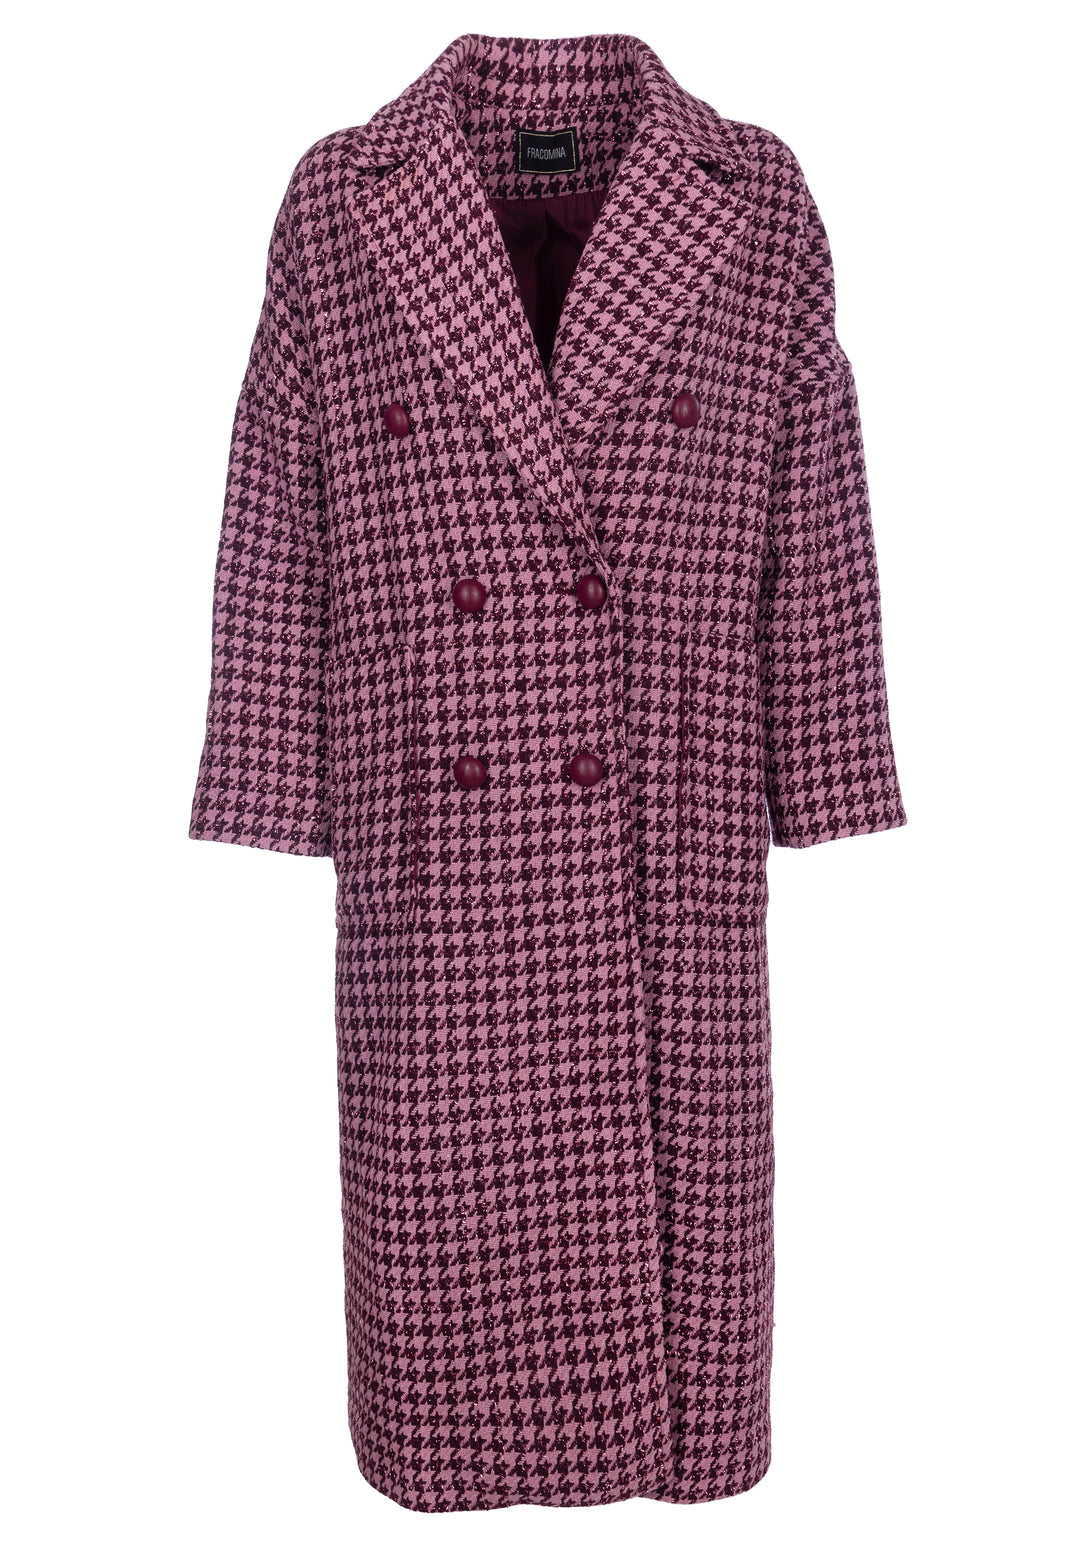 long coat over fit with pied de poule pattern Fracomina FS22WC1008W57201